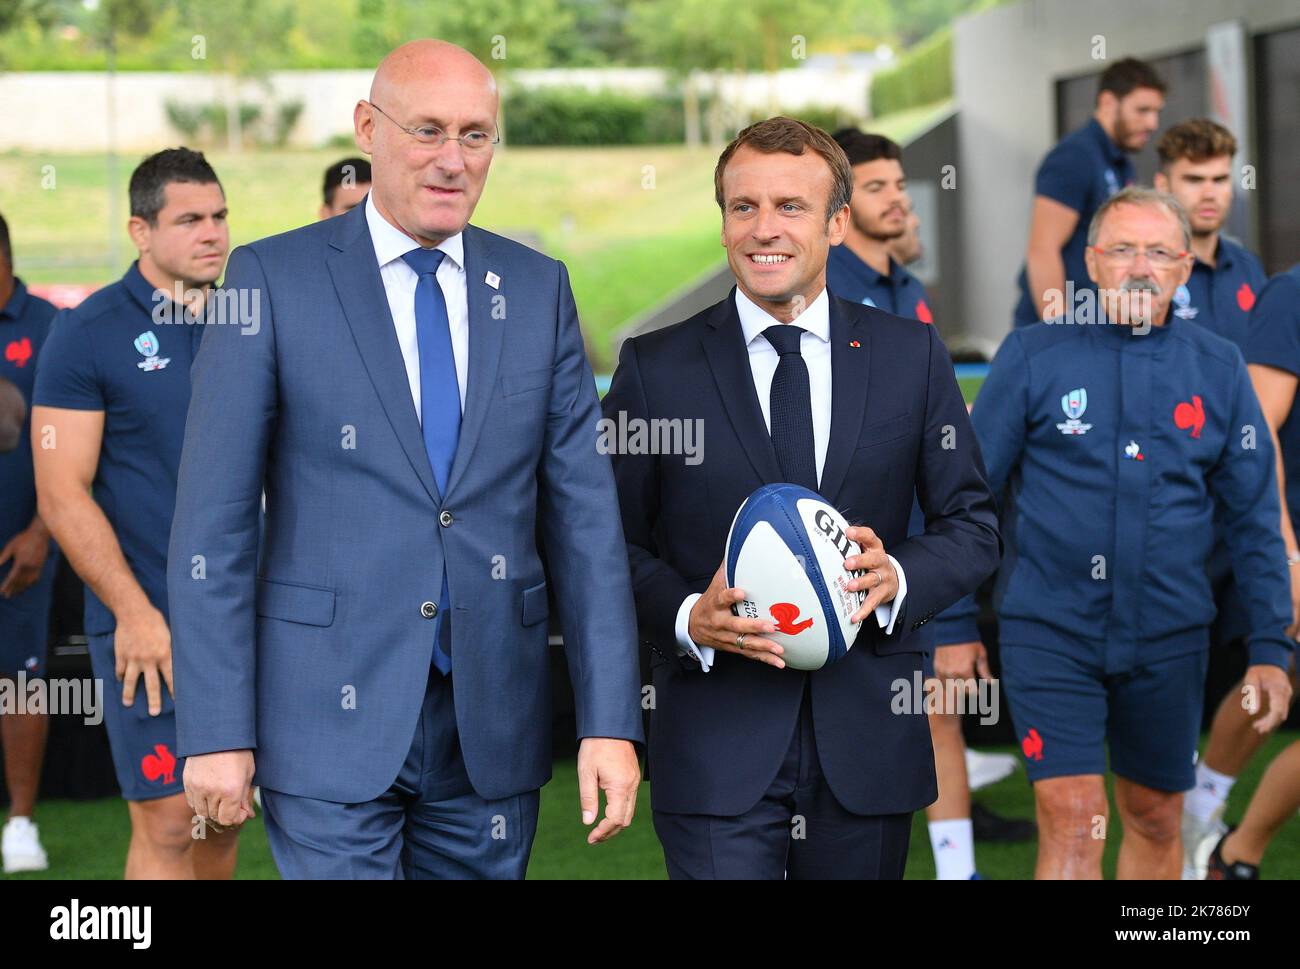 France's President Emmanuel Macron, French Rugby Federation President Bernard Laporte at the National Rugby Center in Marcoussis, south of Paris, on September 5, 2019. The French rugby team is preparing for the upcoming 2019 World Cup in Japan. President Macron visited ahead of the upcoming Rugby World Cup, at the National Rugby Center in Marcoussis  Stock Photo